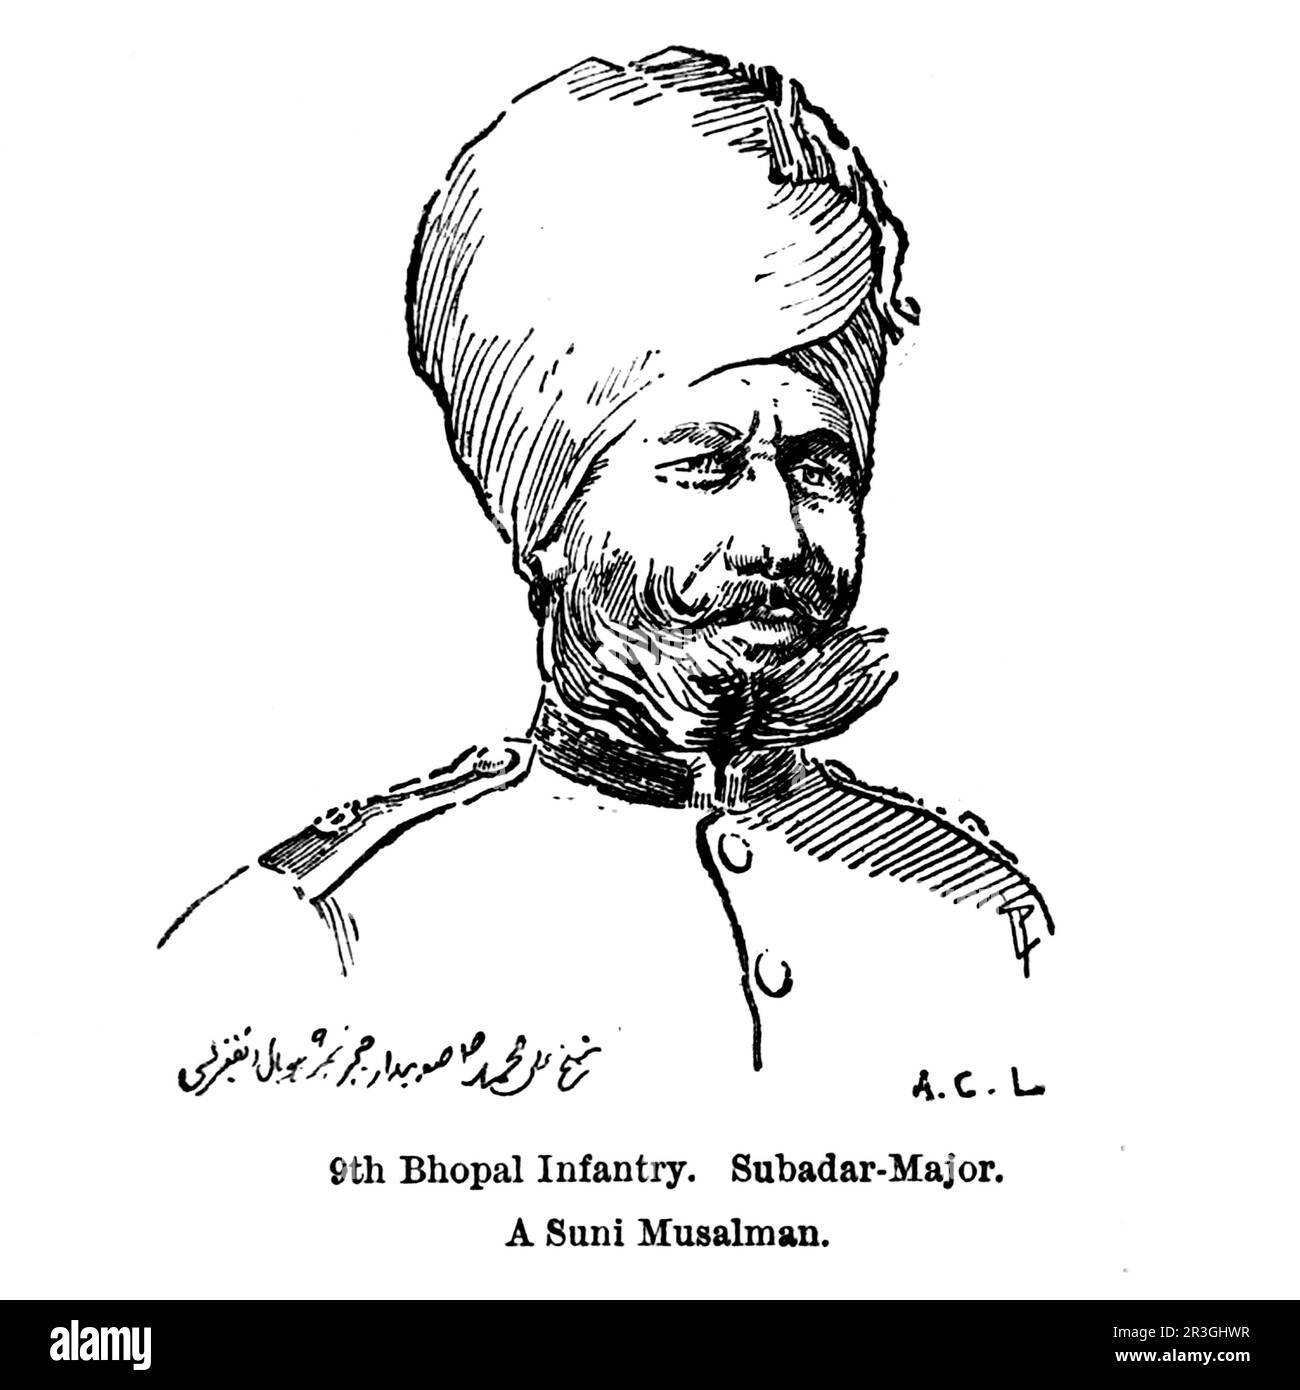 9th Bhopal Infantry. Subadar-Major. A Suni Musalman Sketch by Major Alfred Crowdy Lovett, (1862-1919) from the book ' The armies of India ' by Major George Fletcher MacMunn, (1869-1952) Publication date 1911 Publisher London, Adam and Charles Black Stock Photo